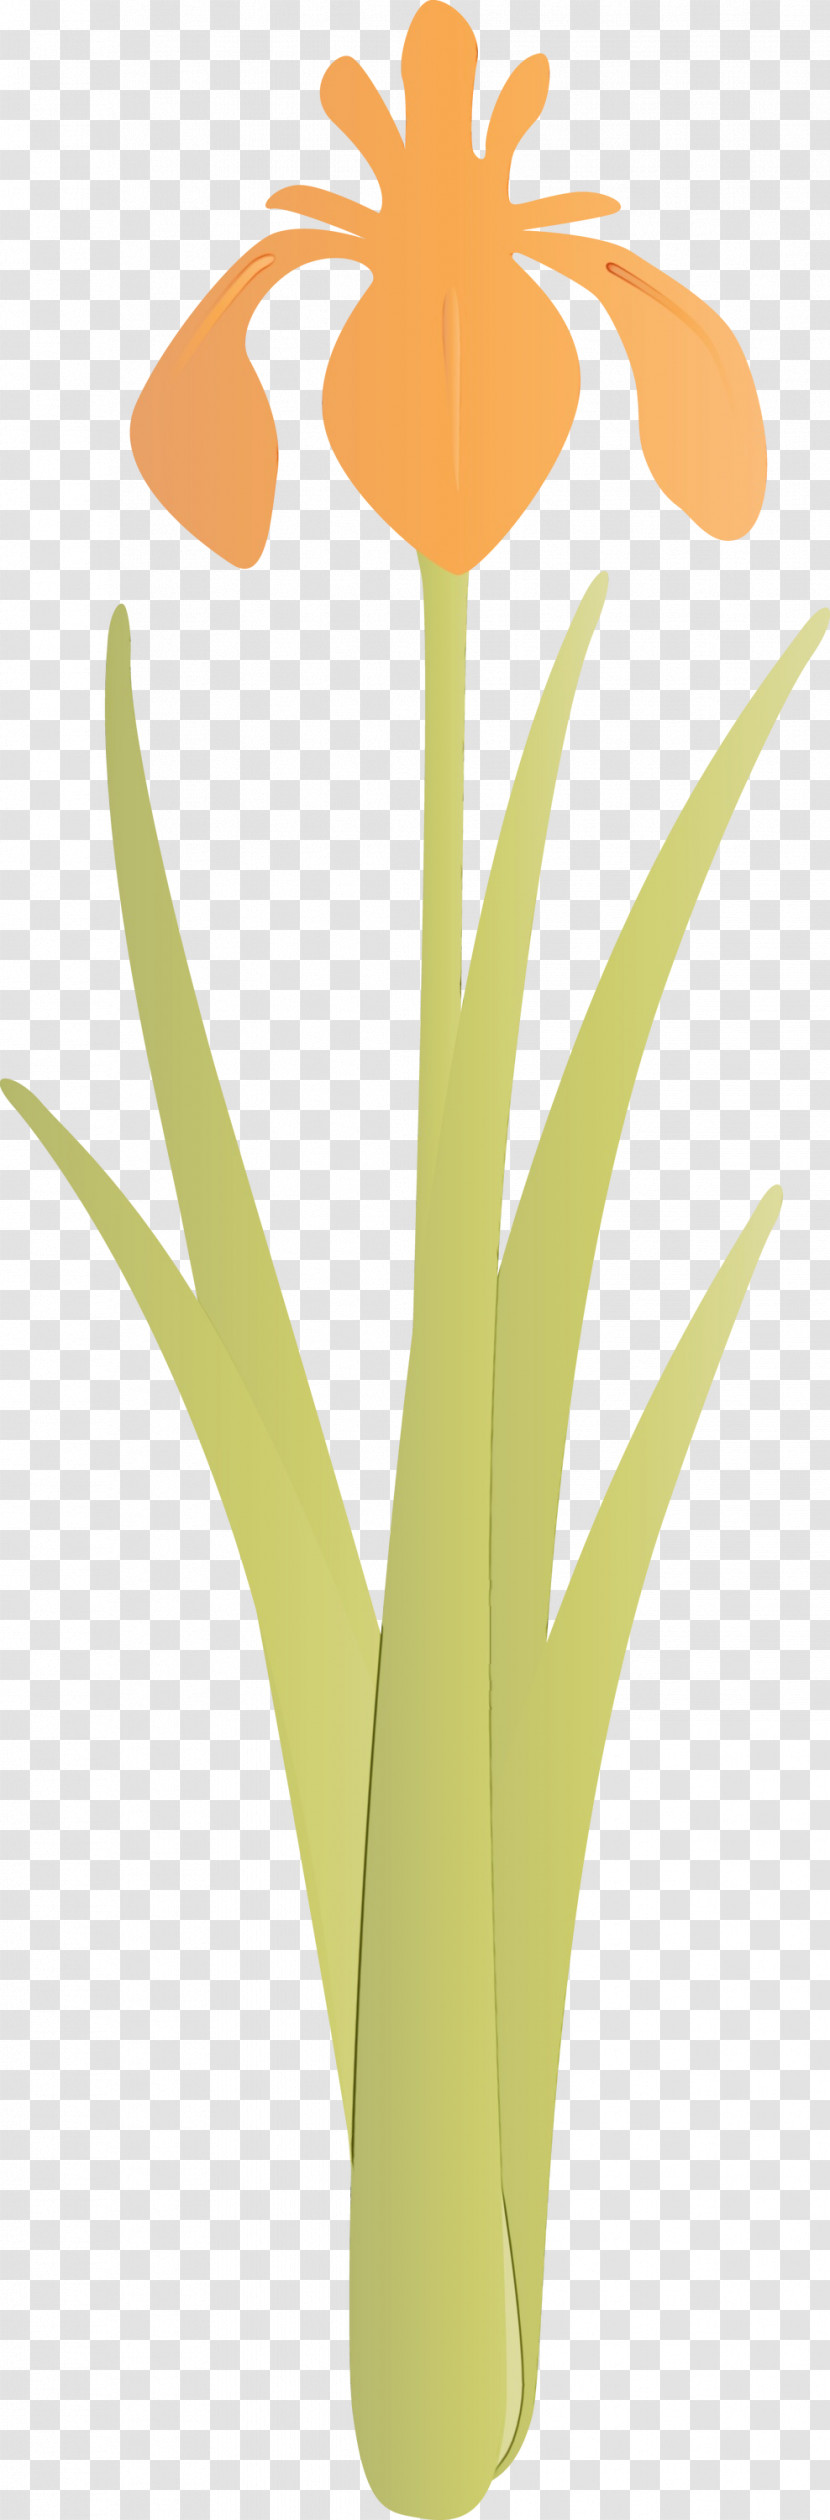 Yellow Leaf Plant Grass Family Flower Transparent PNG